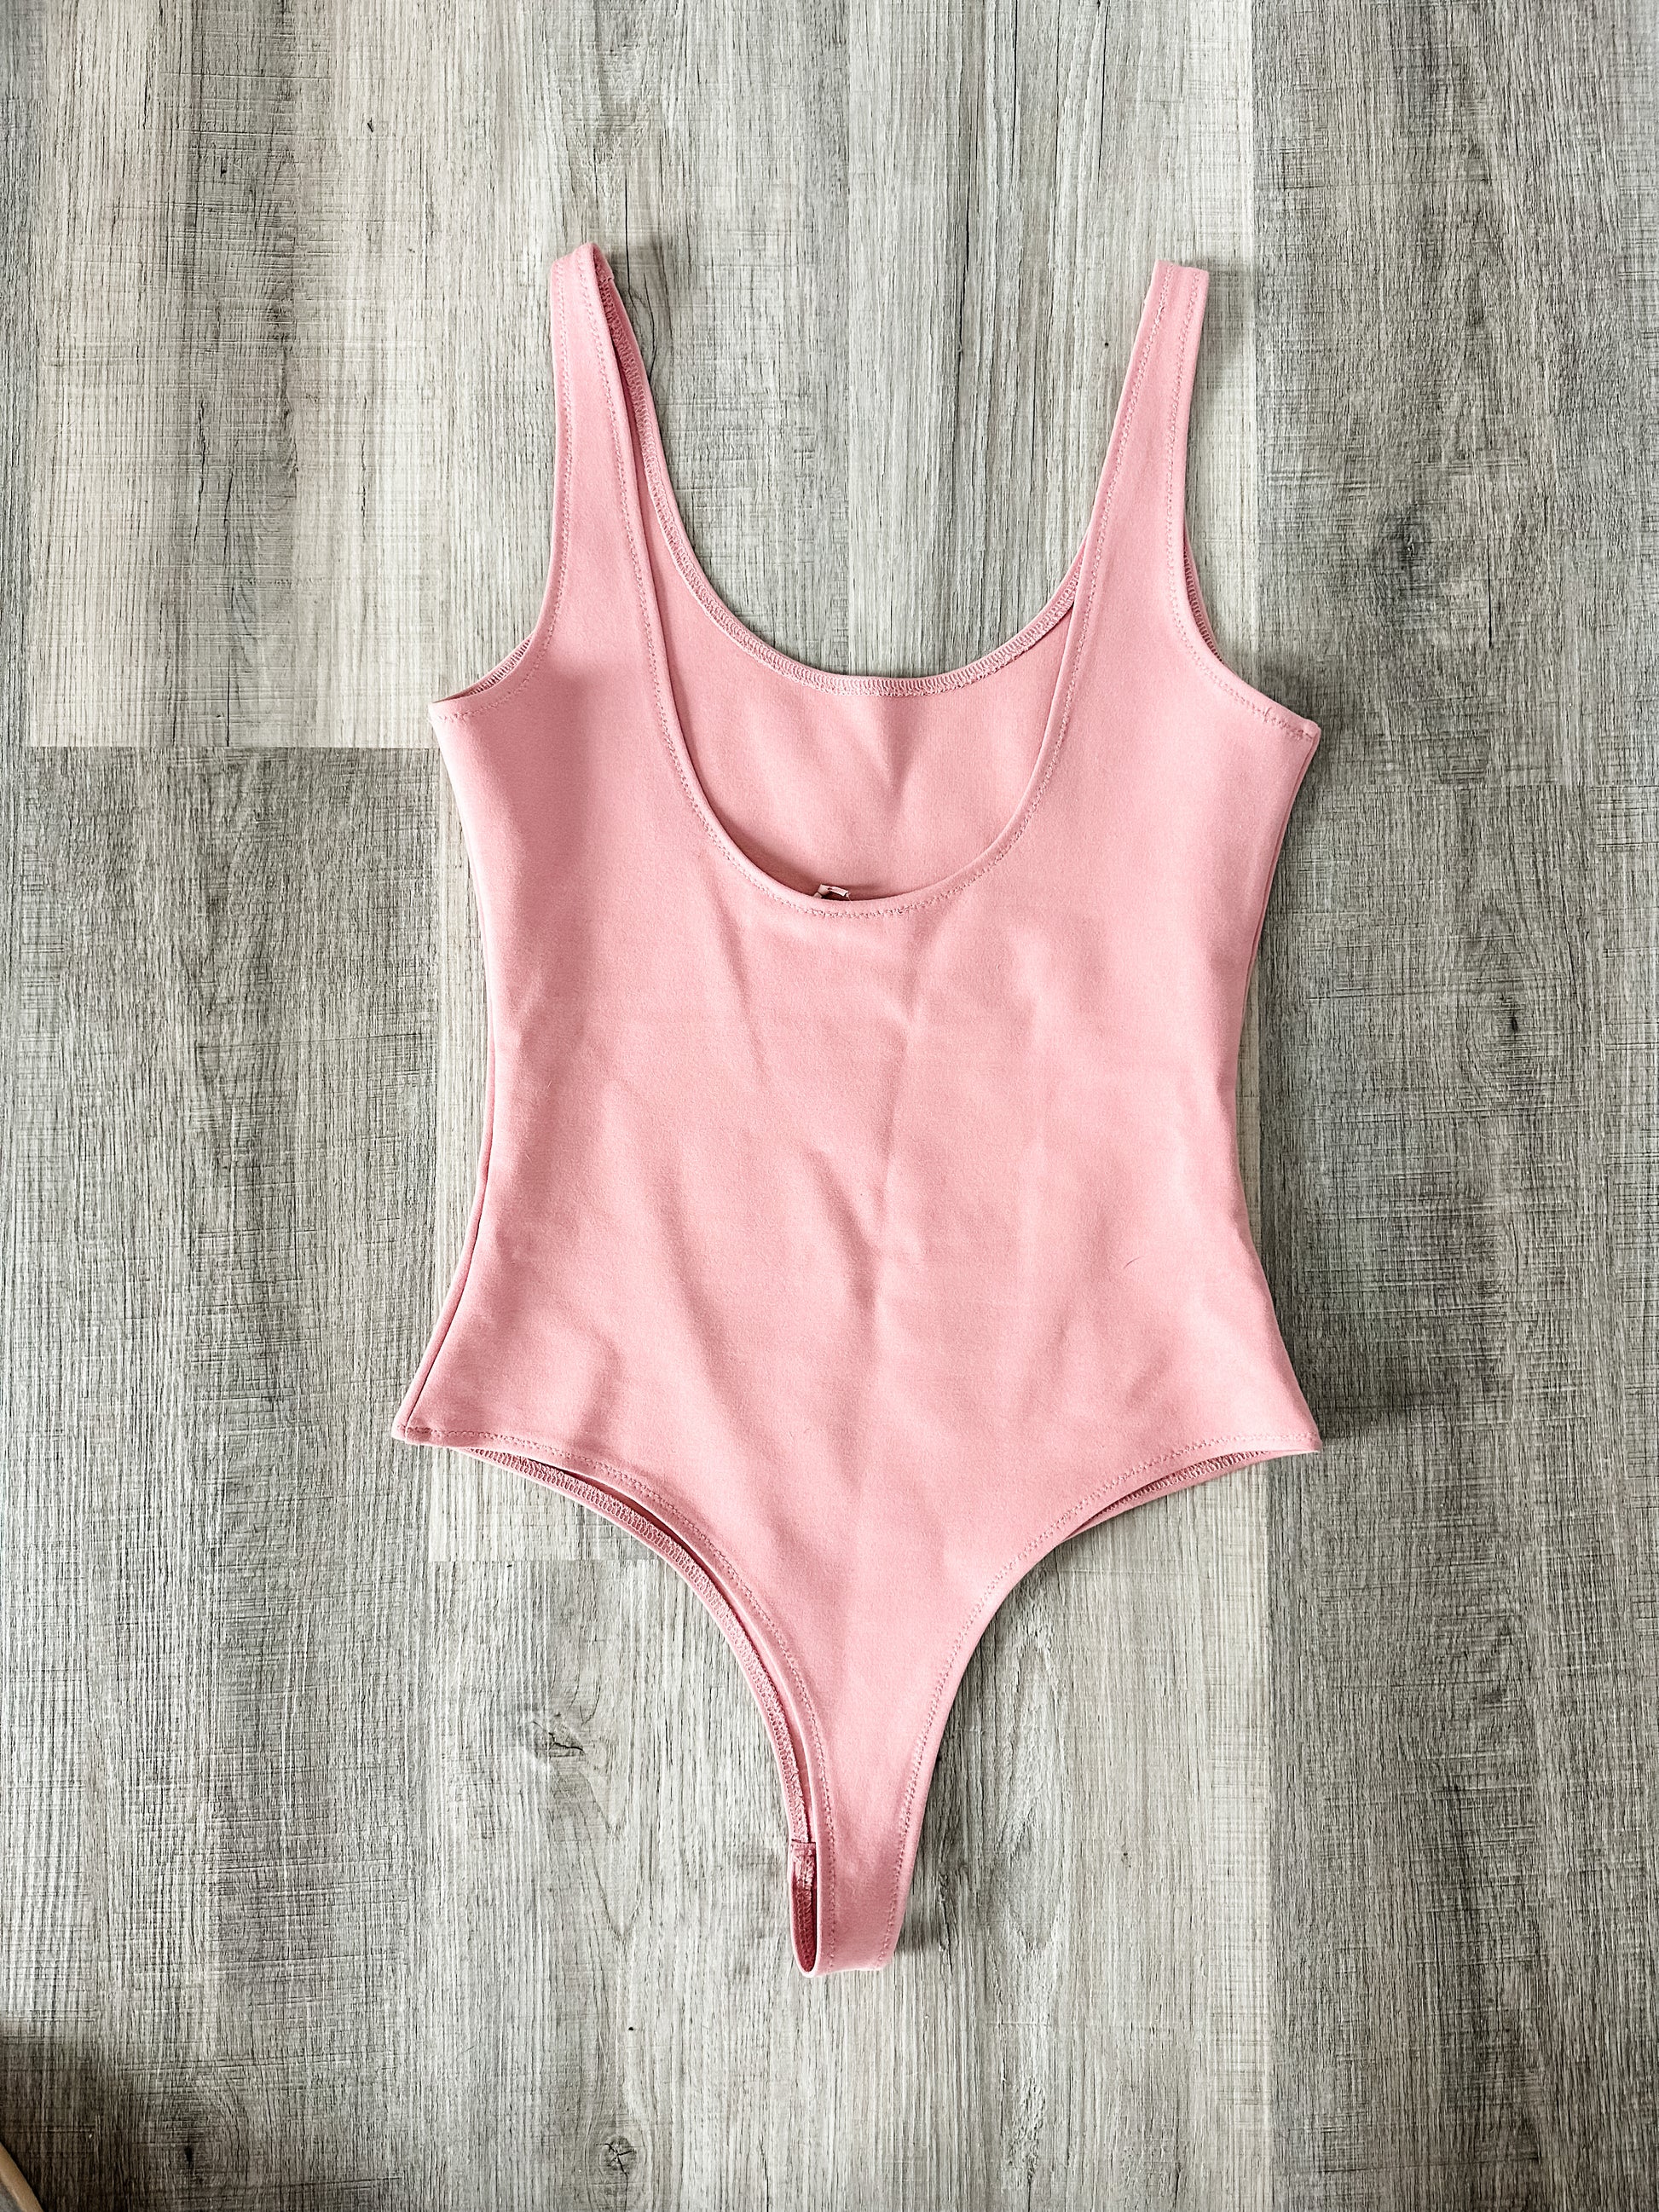 Tank Body Suit – The White Pear Boutique